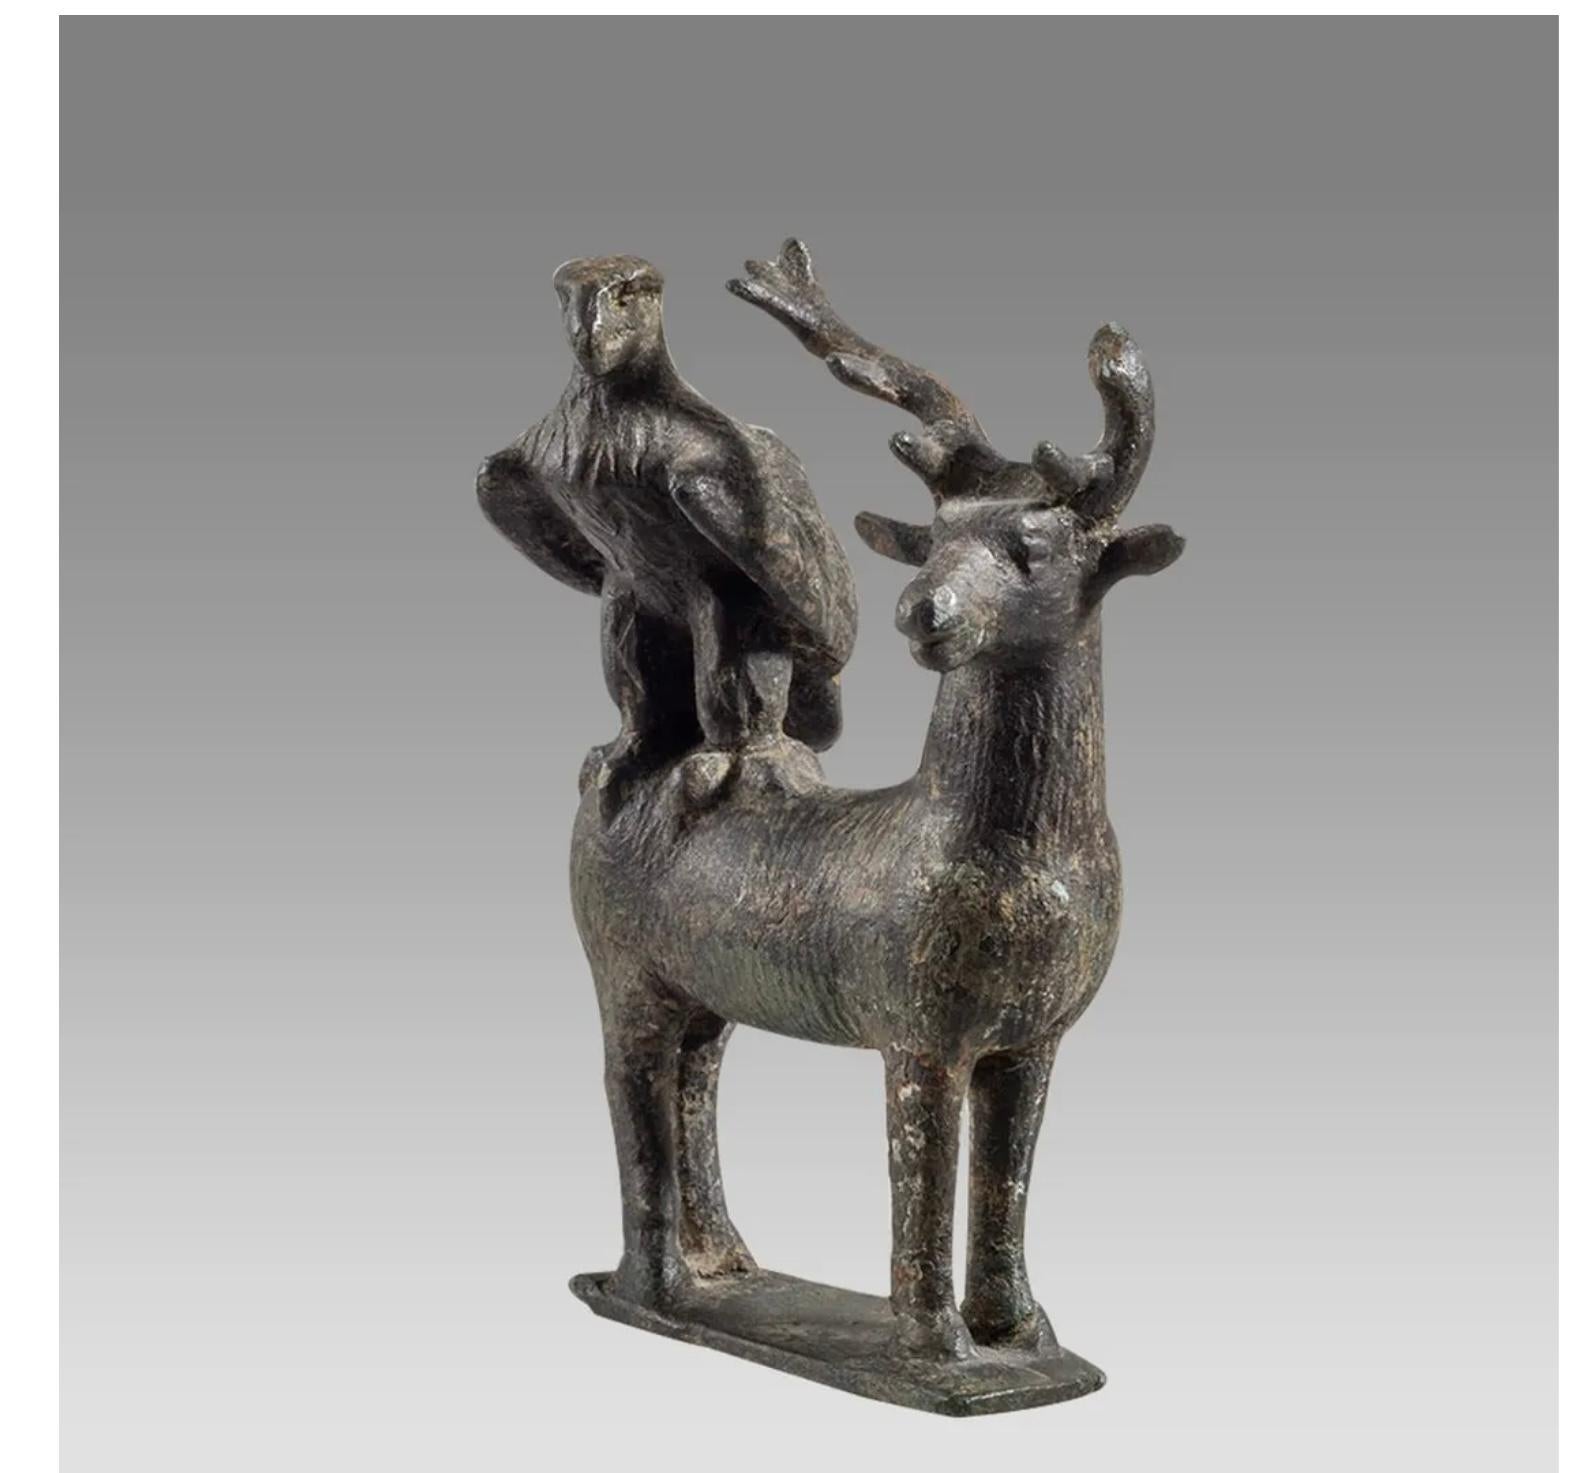 This Ancient Roman Military Bronze eagle and stag, dating from the 1st to 2nd century AD, stands at a modest yet captivating 3 1/8 inches in height. The finely cast bronze sculpture showcases an eagle alongside a stag, symbolizing the divine